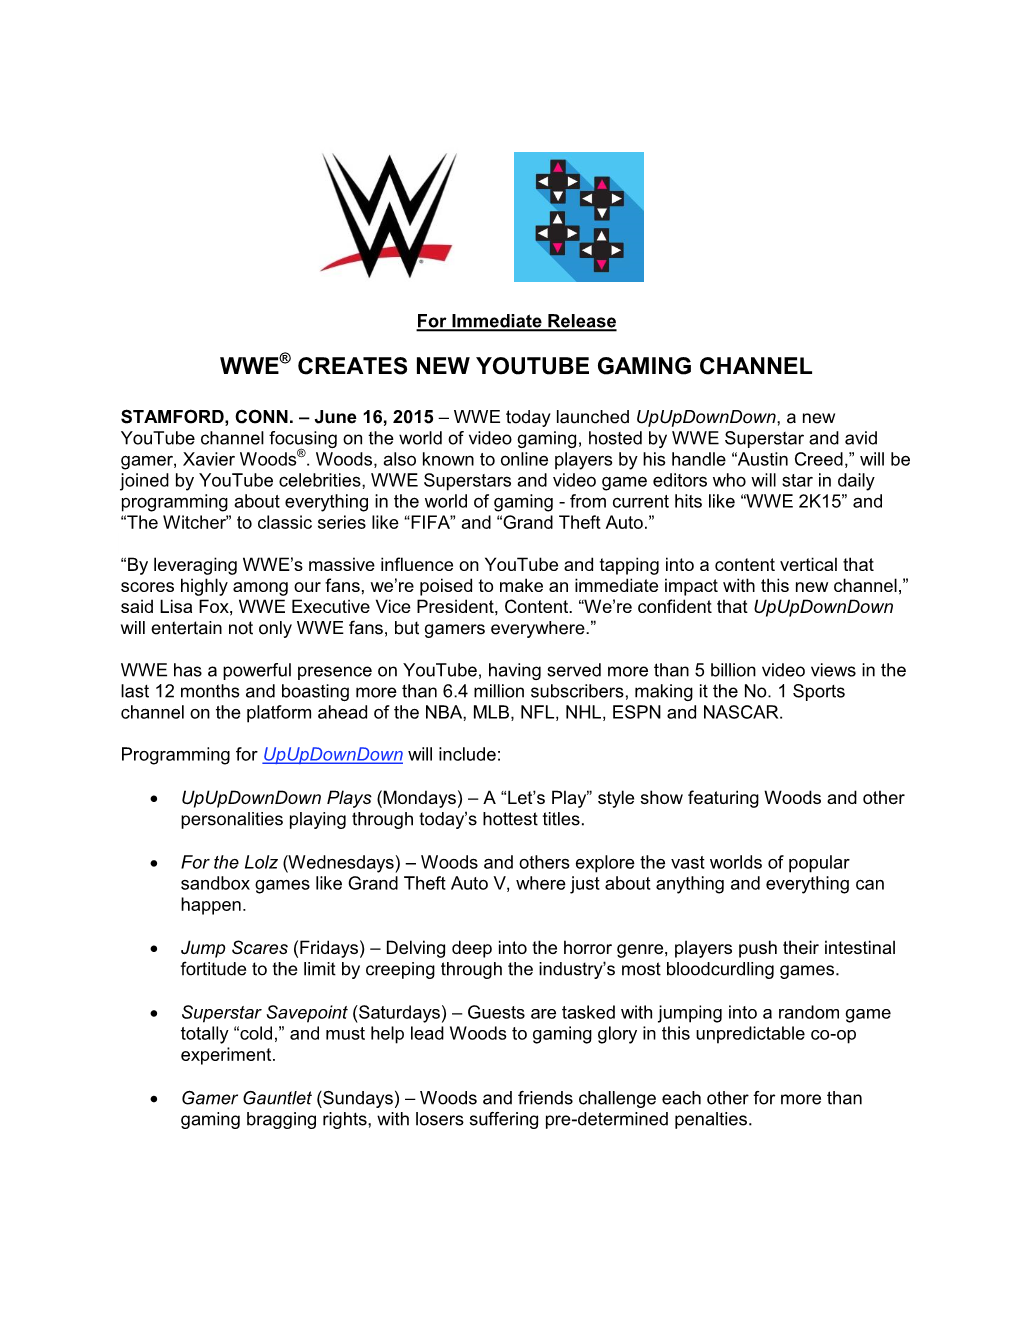 Wwe Creates New Youtube Gaming Channel